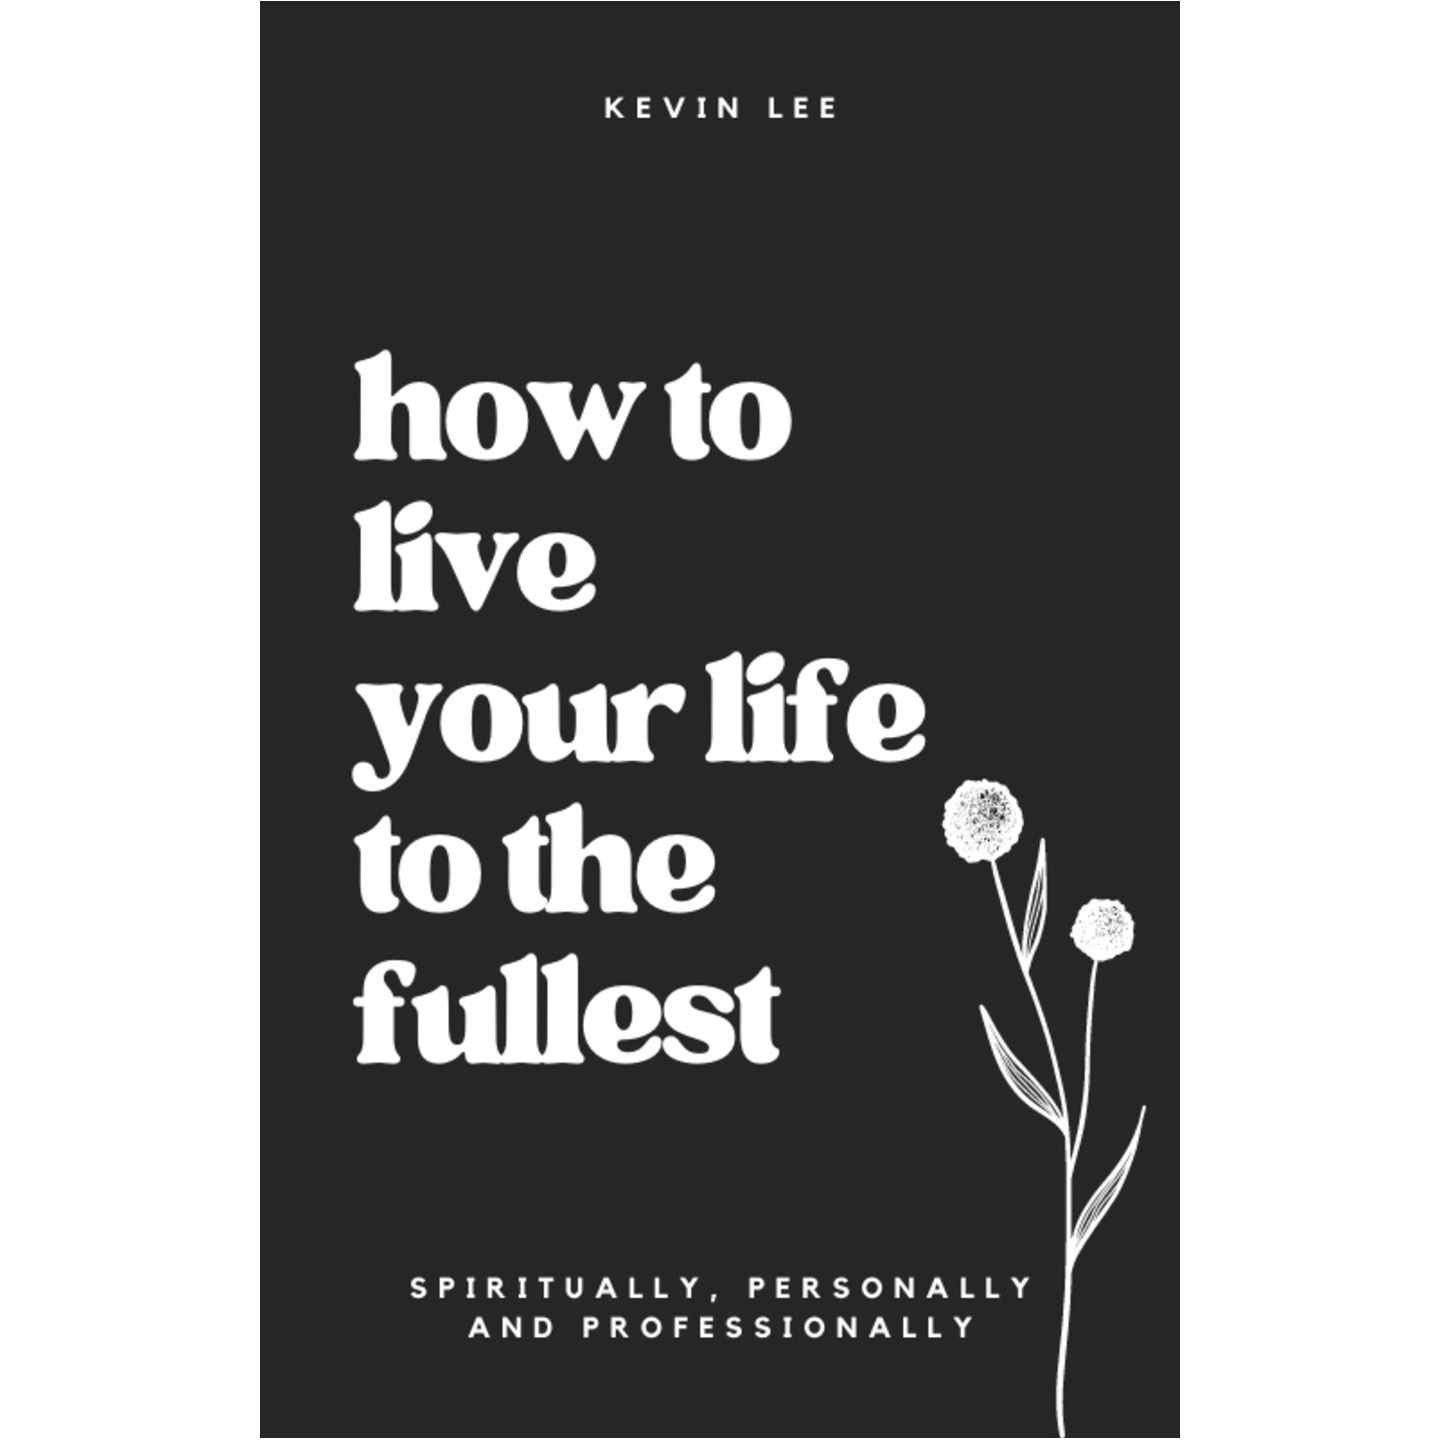 How to live your life to the fullest - spiritually, personally, and professionally